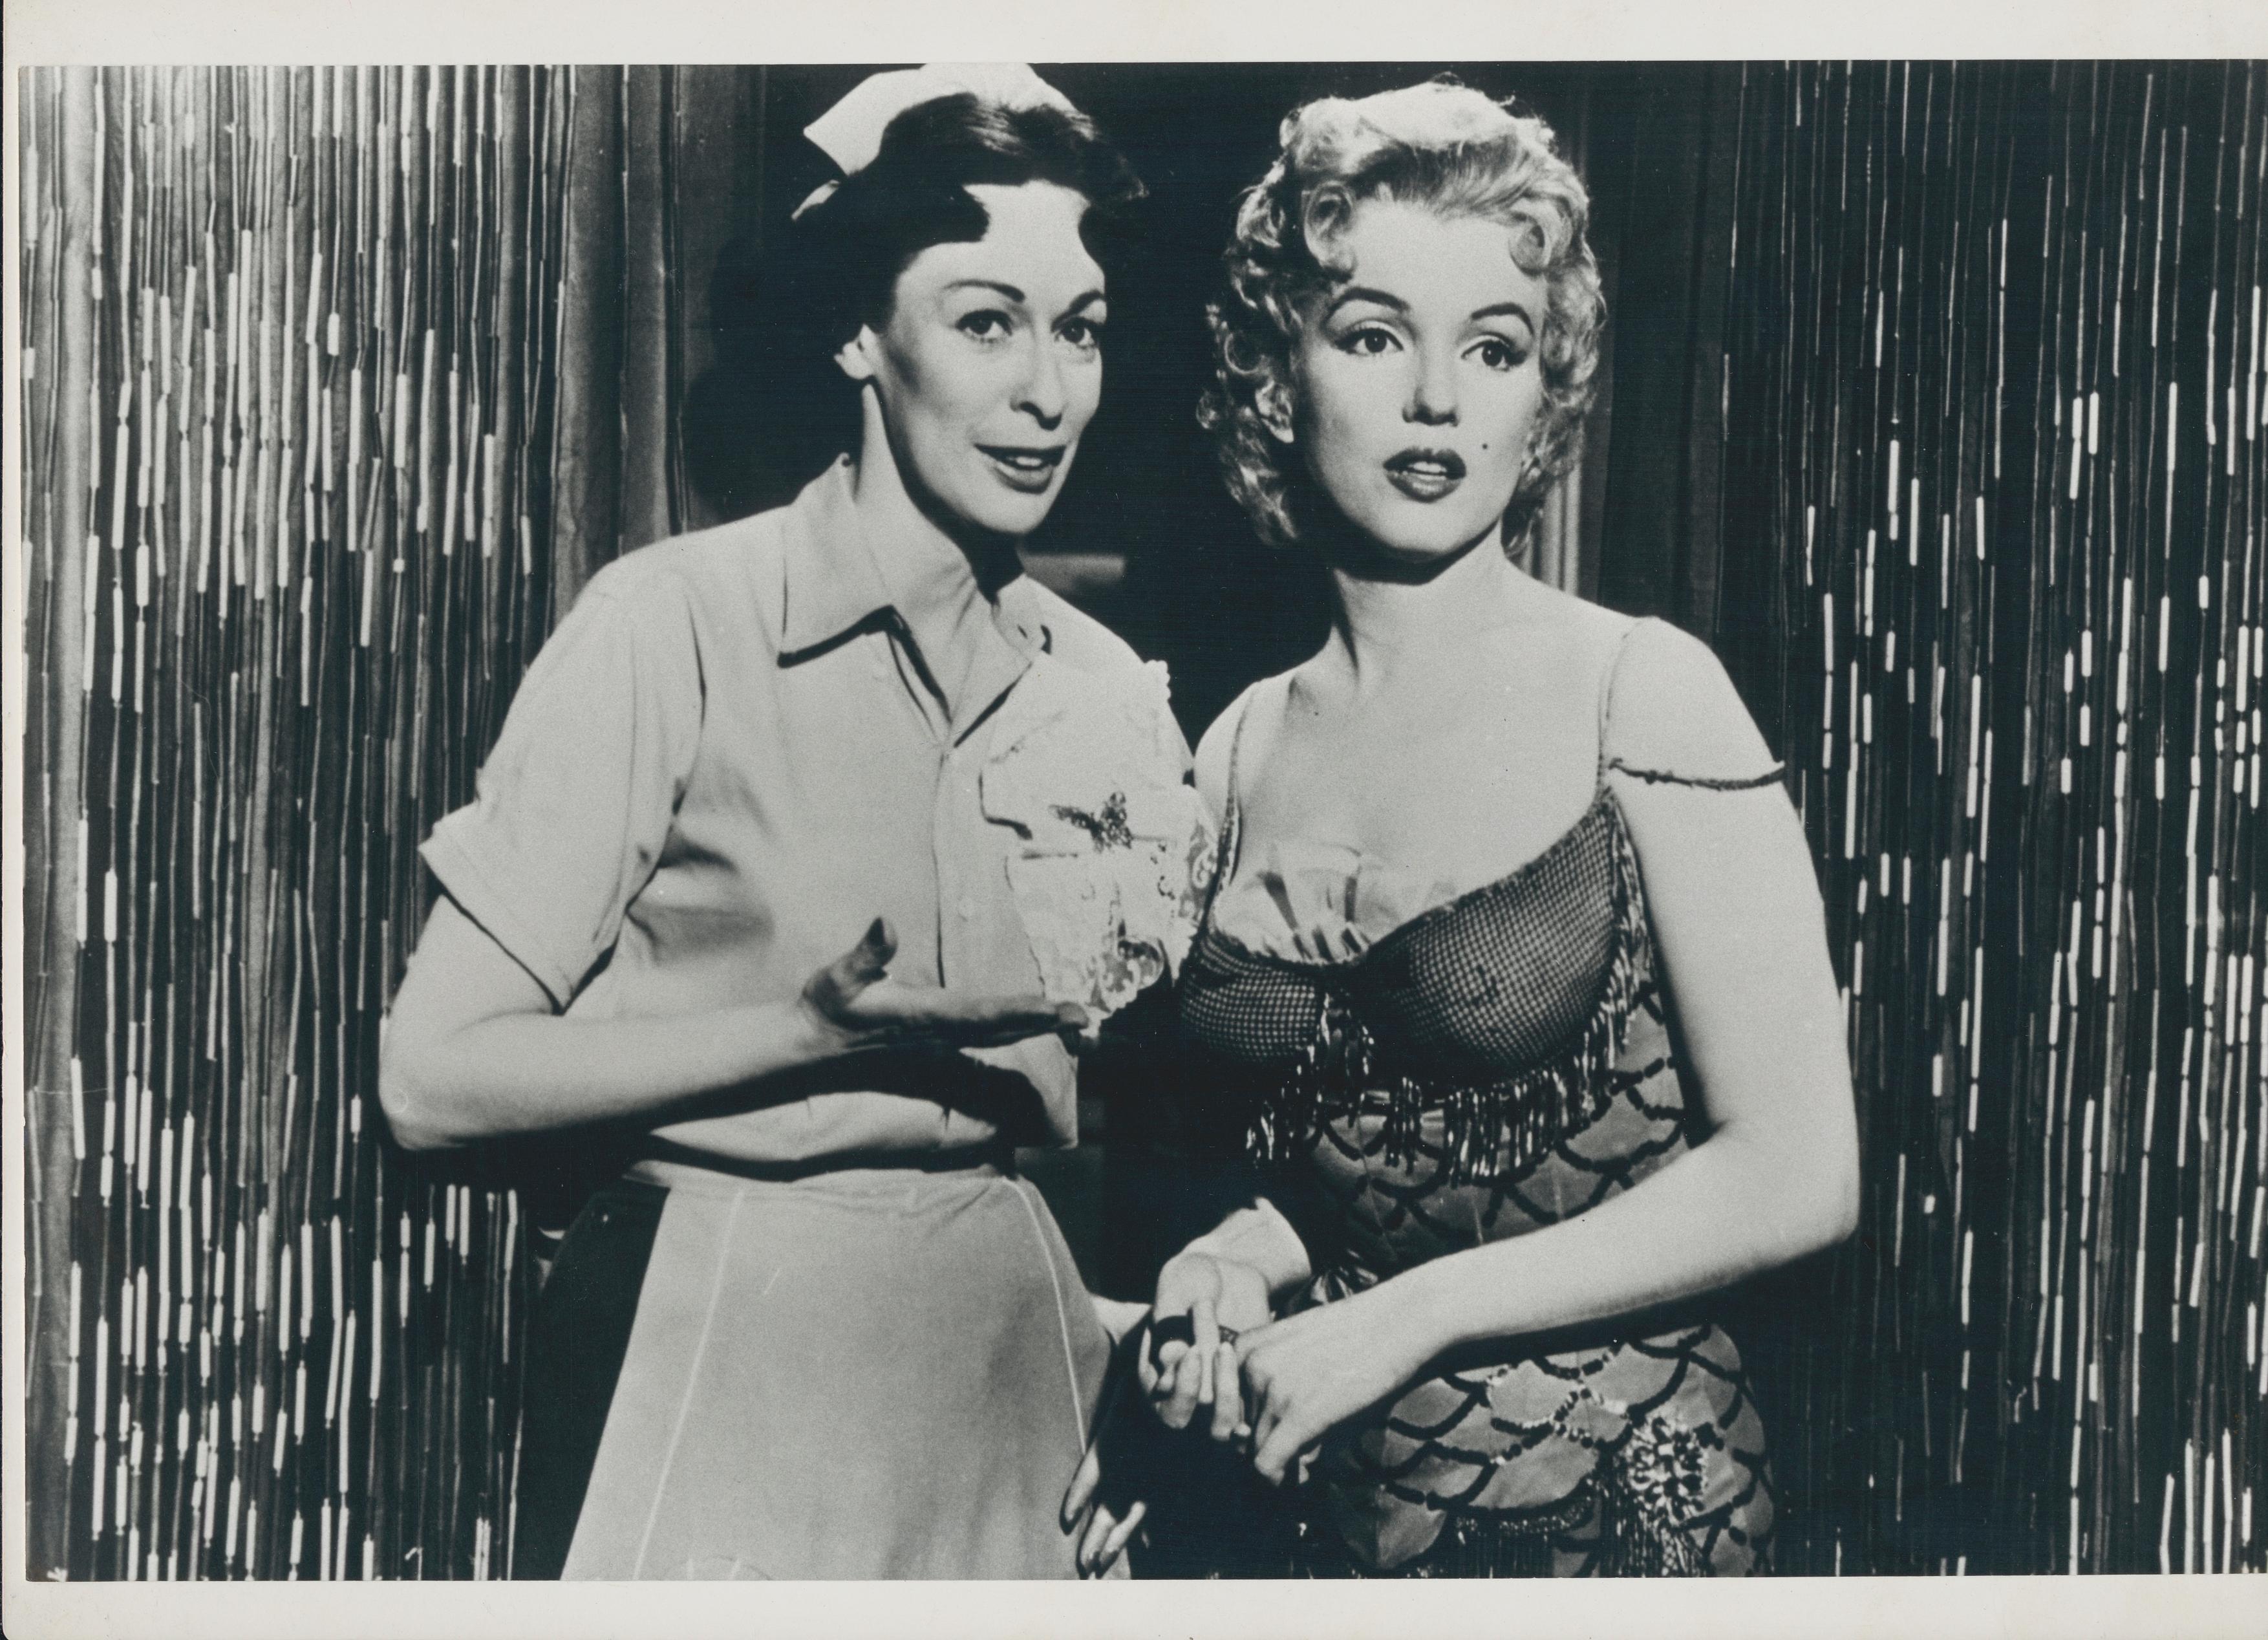 Unknown Portrait Photograph - Marilyn Monroe and Eileen Beckert in "Bus Stop", 1956, 29, 8 x 19, 8 cm